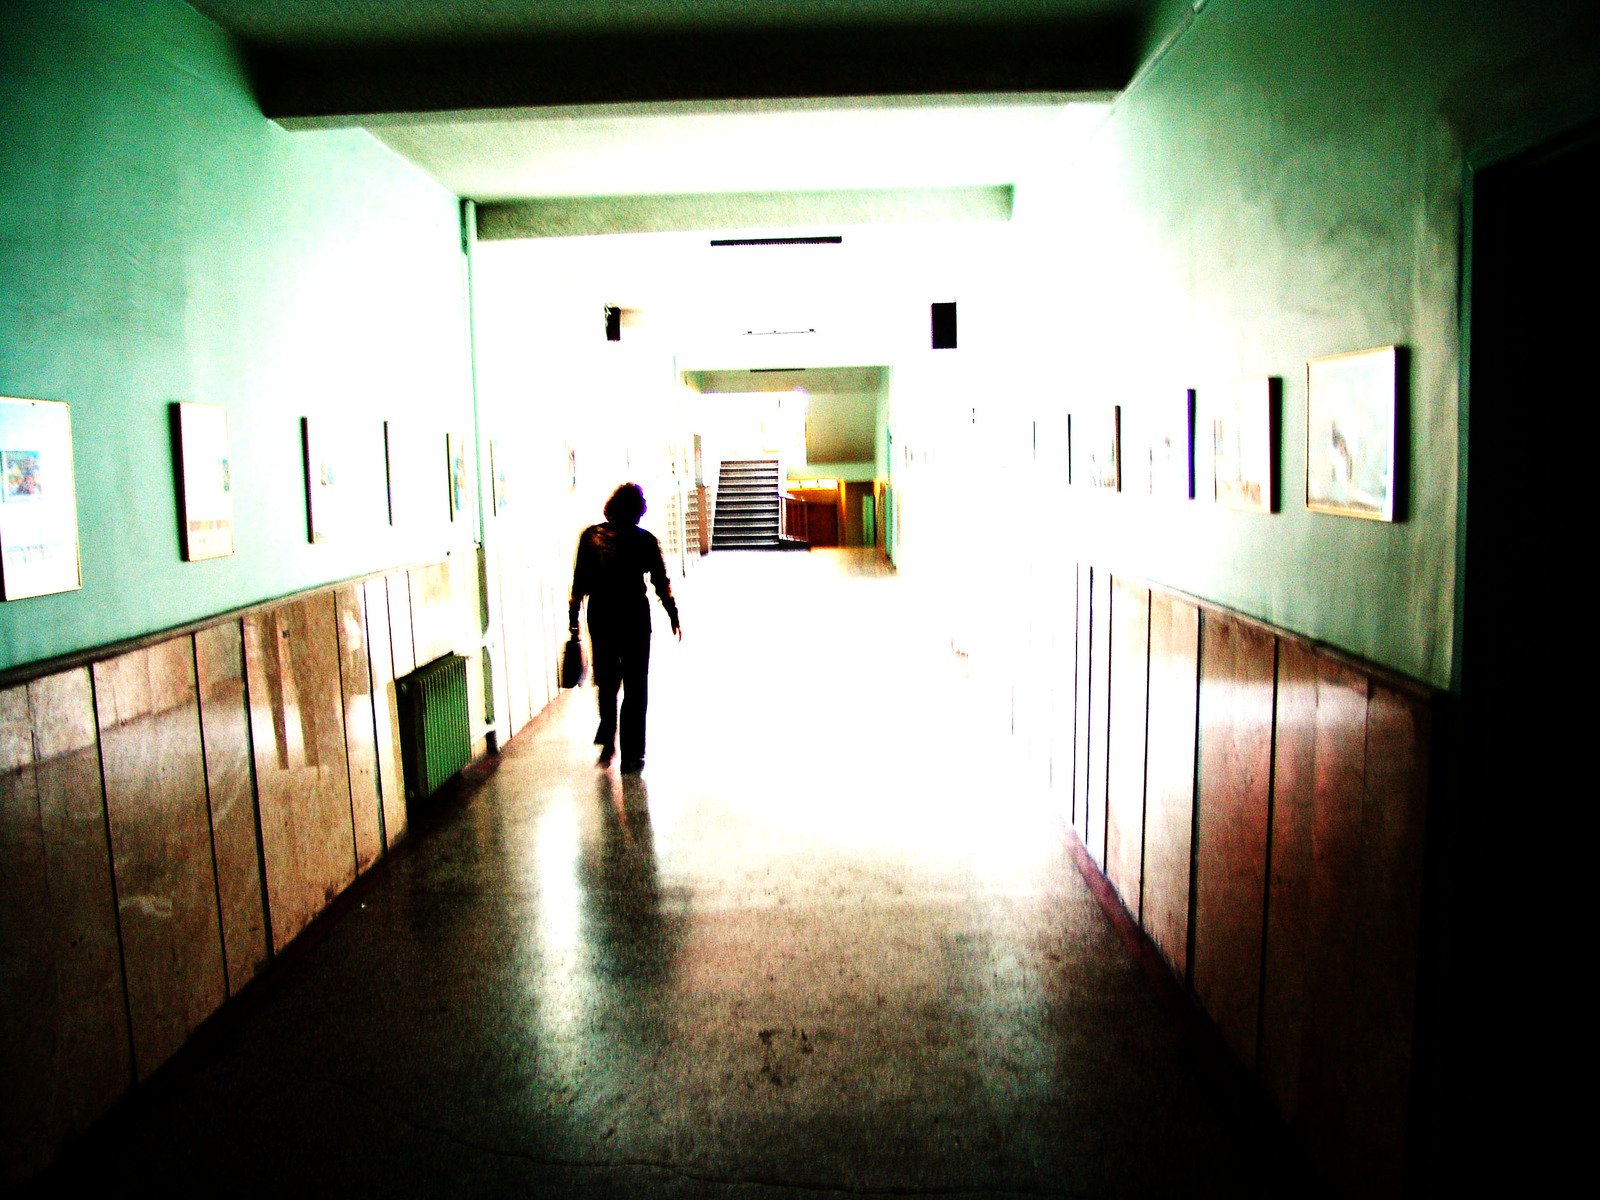 person in silhouette walking in an apartment hallway